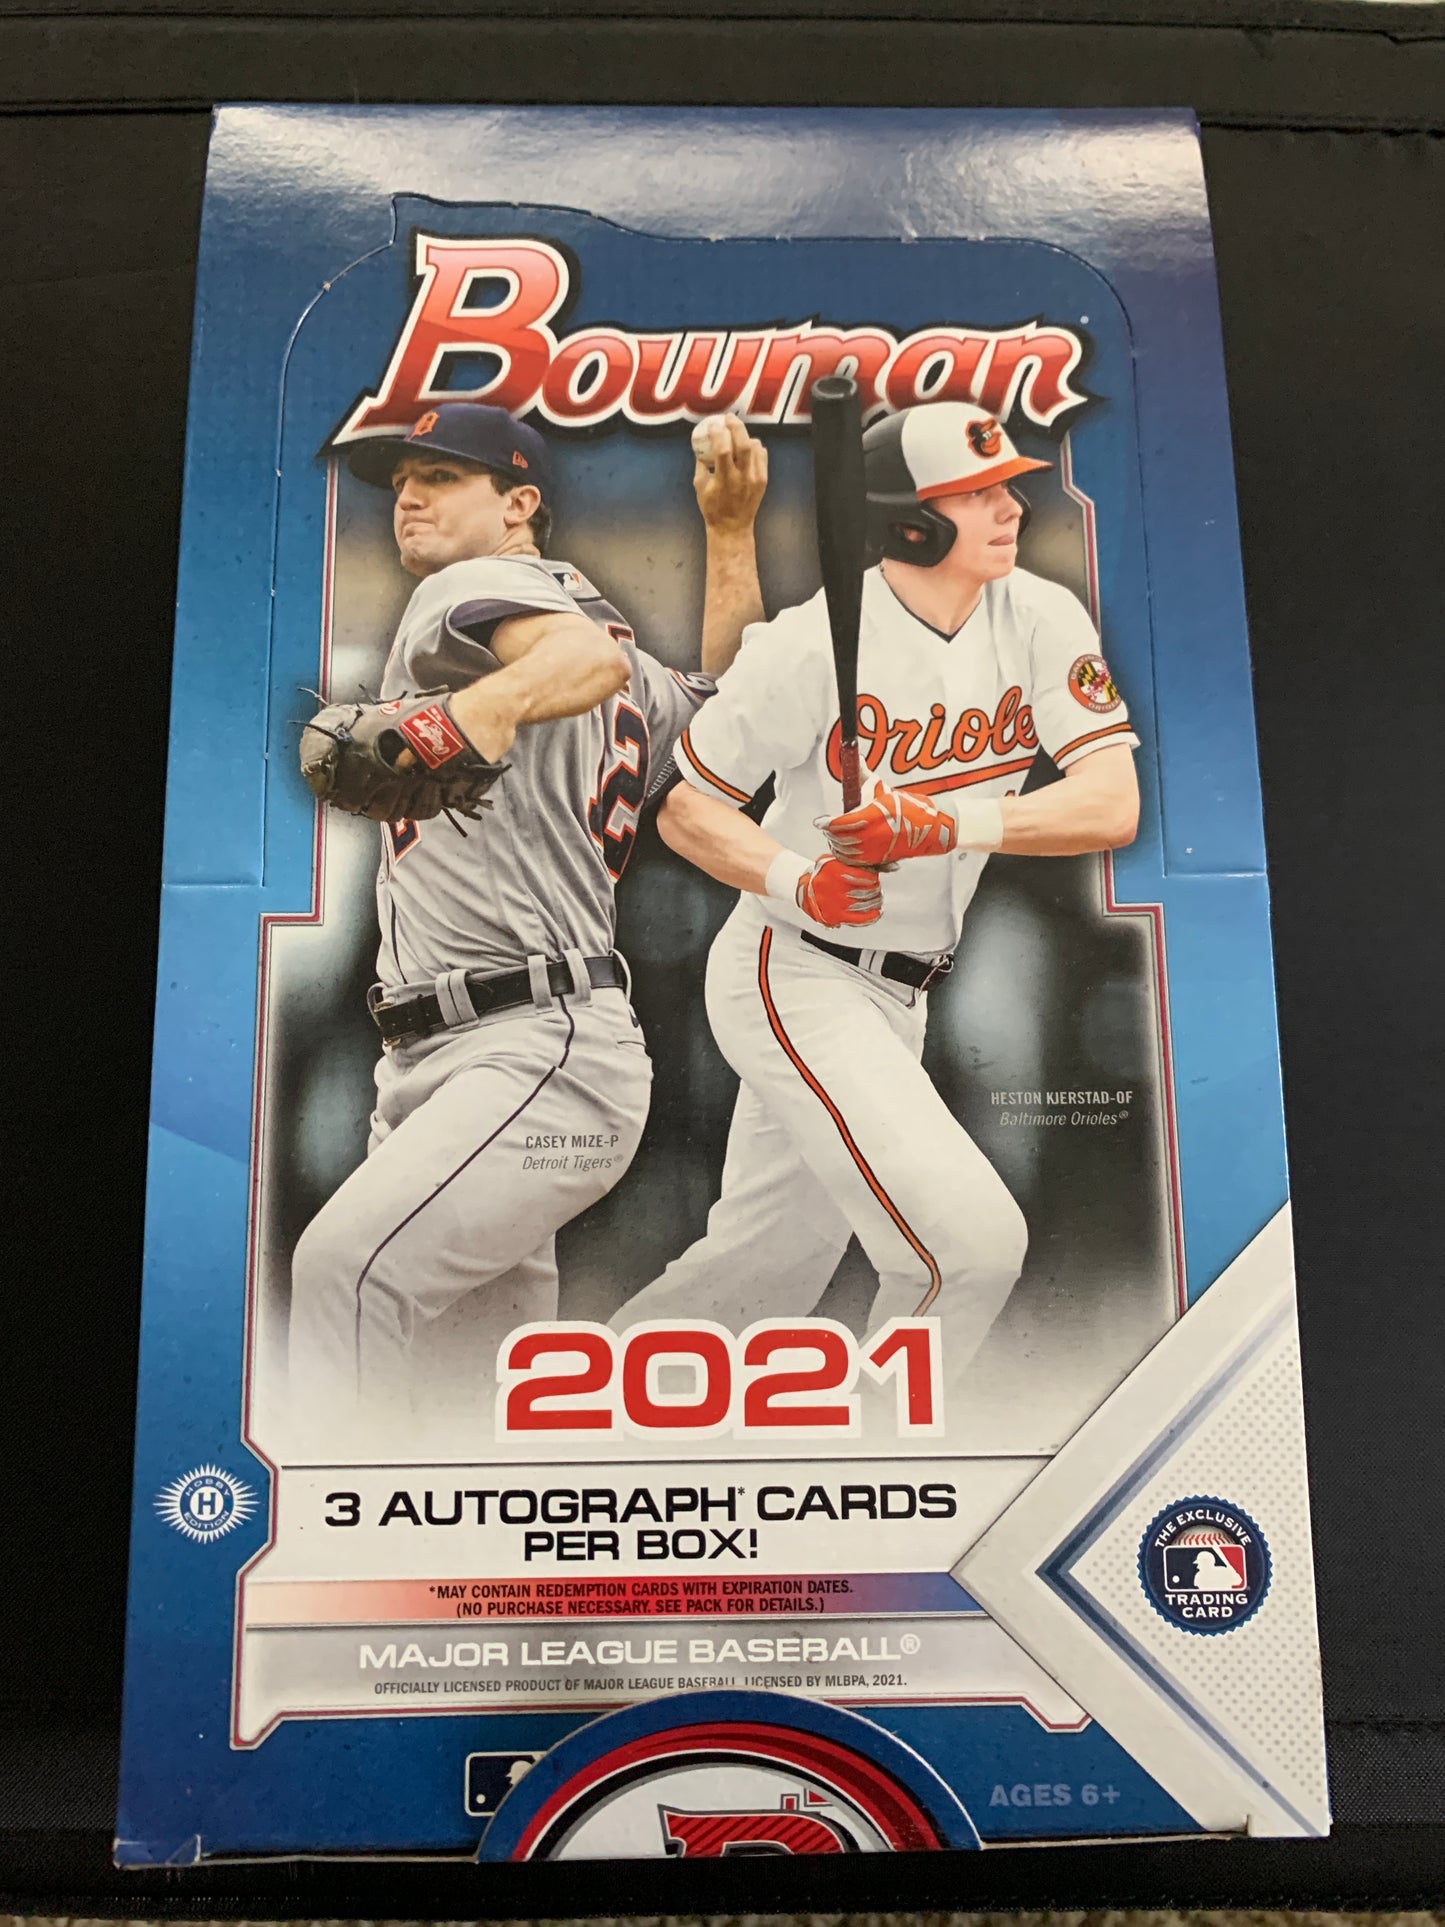 2021 Bowman Baseball Hobby Jumbo Single Pack 32 cards per pack.  look for rookie cards of Alec Bohm, Jake Cronenworth, Dylan Carlson and many more